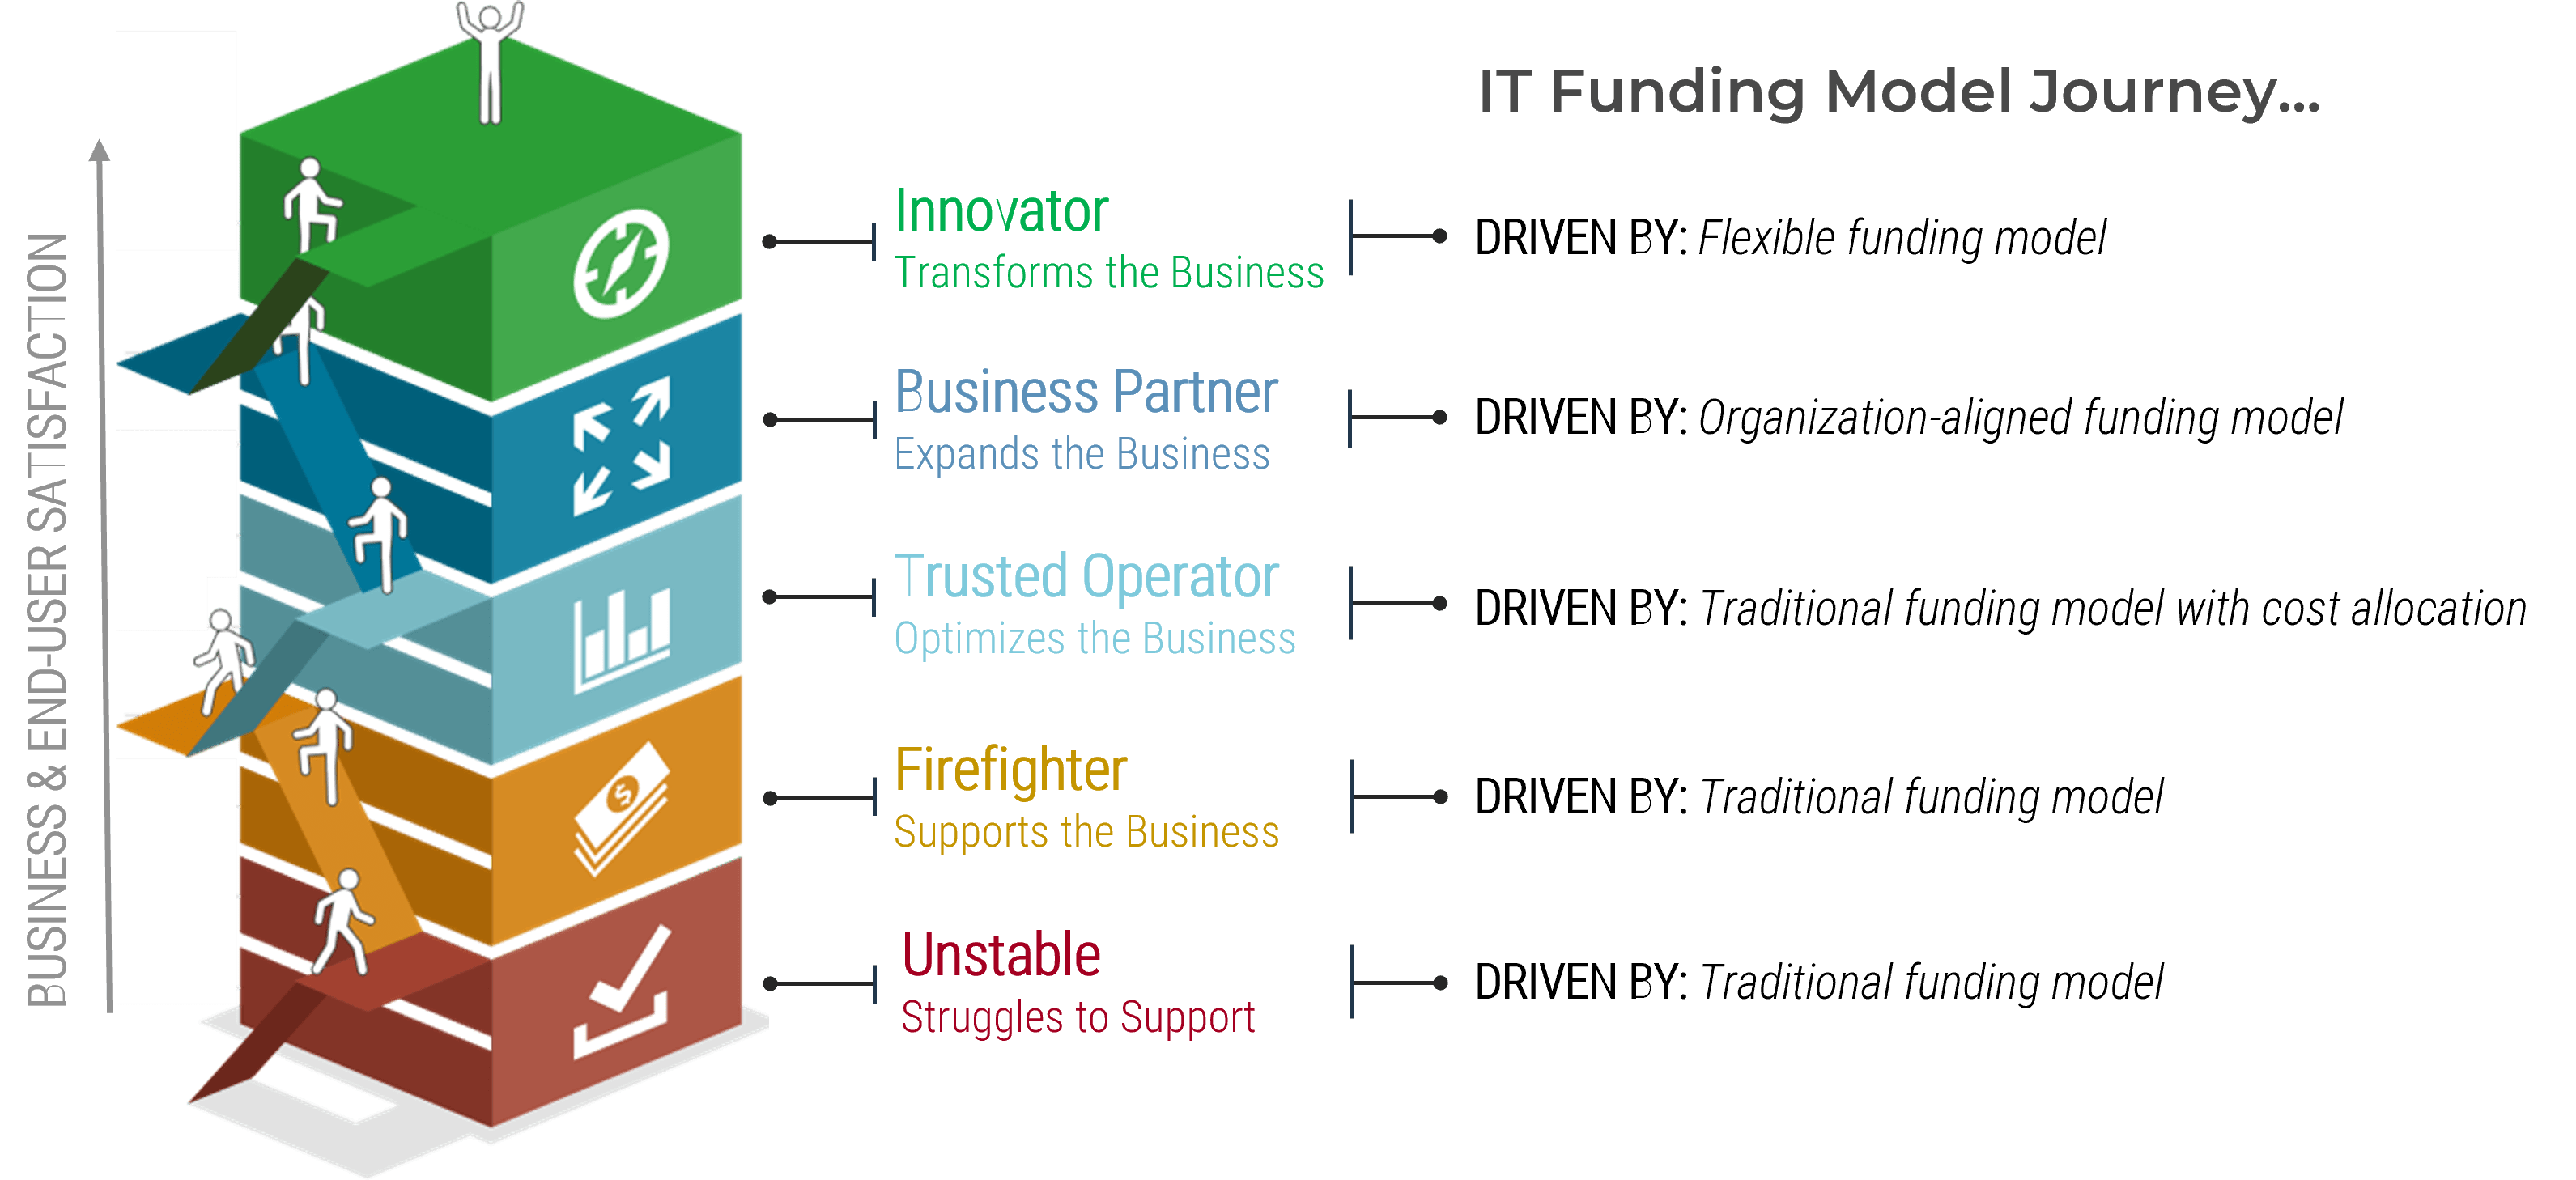 The image contains a screenshot of the IT Funding Model Journey.